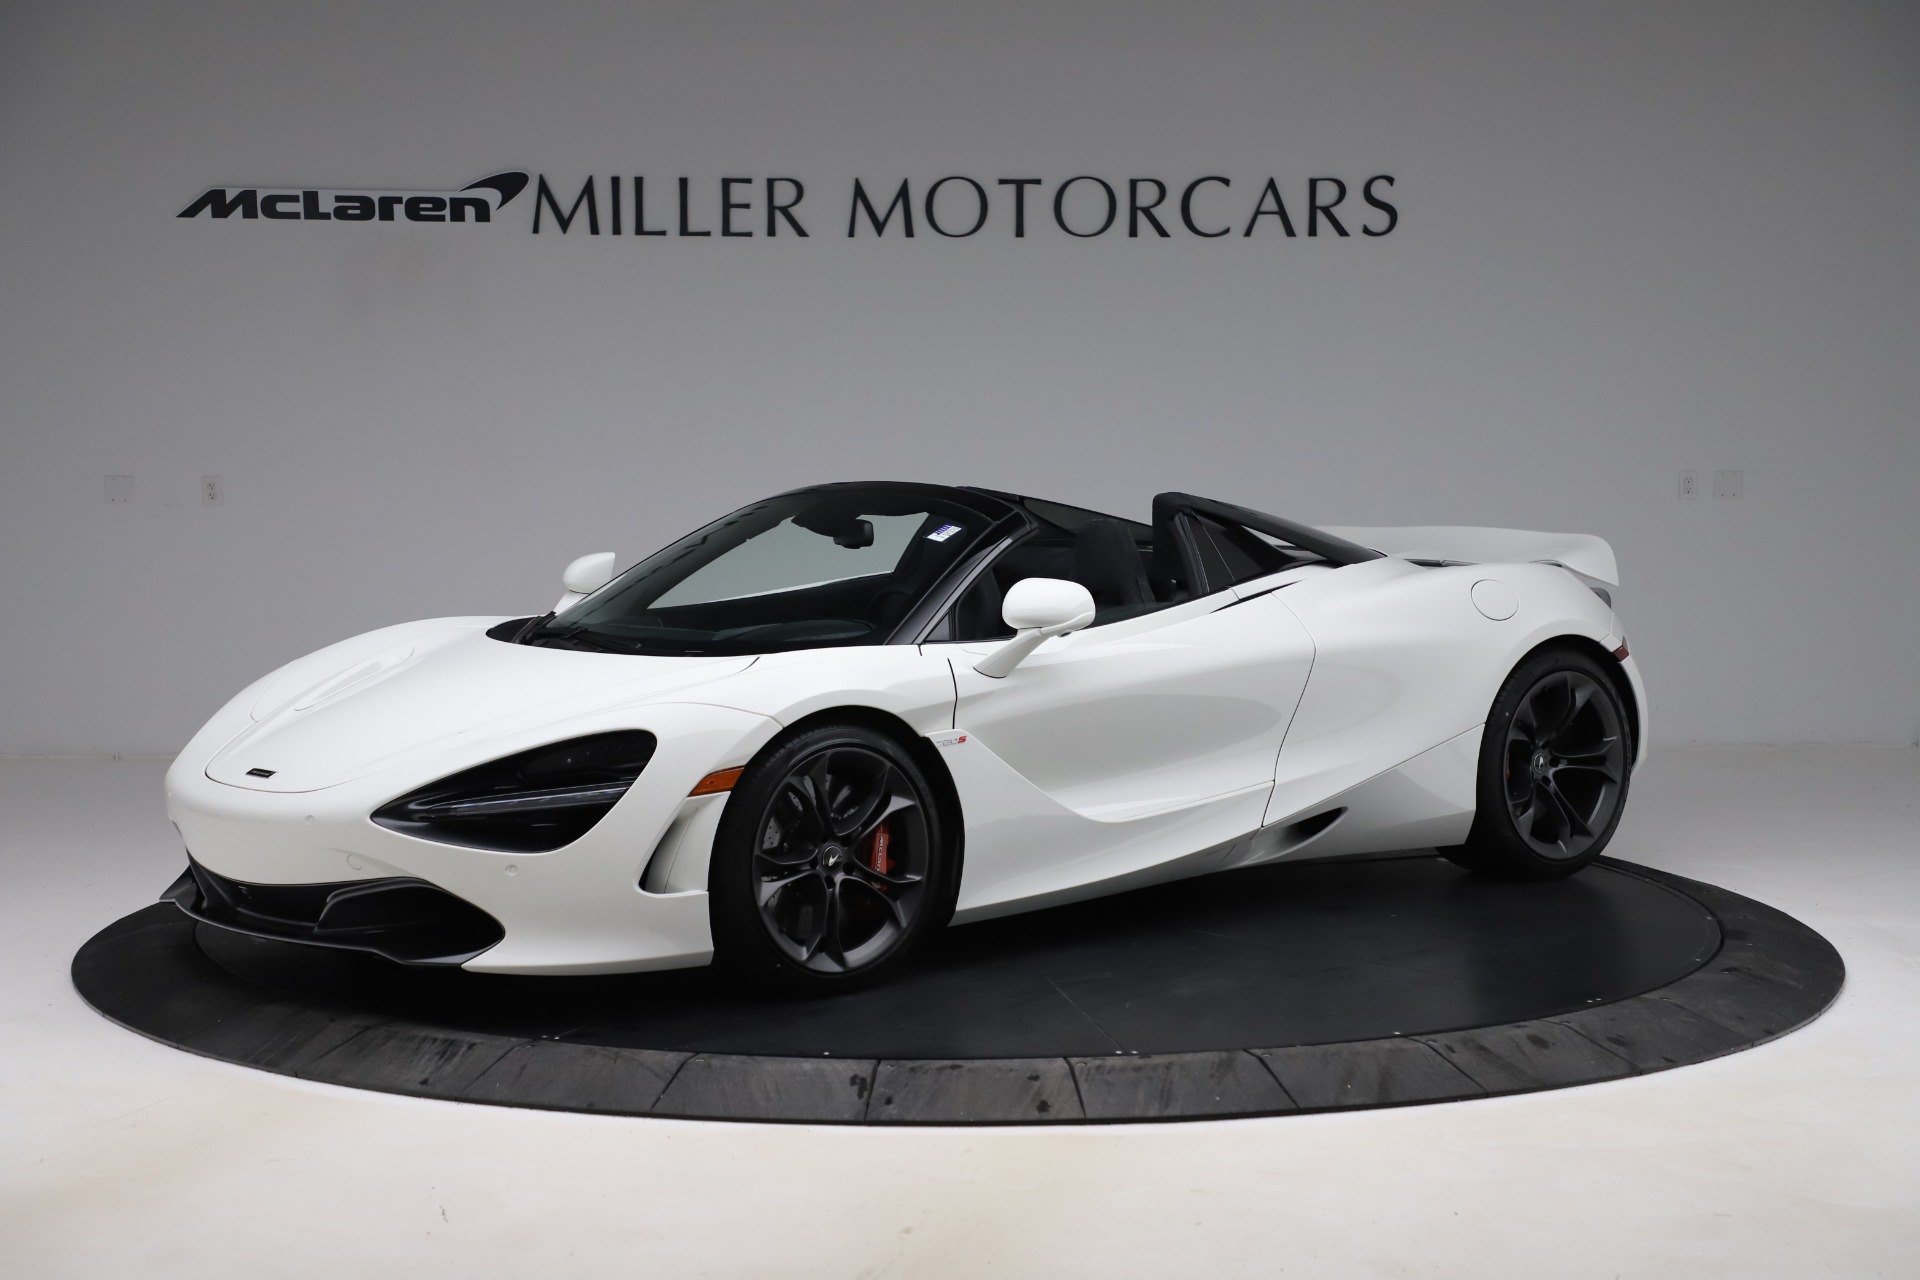 Used 2020 McLaren 720S Spider for sale $334,900 at Bentley Greenwich in Greenwich CT 06830 1